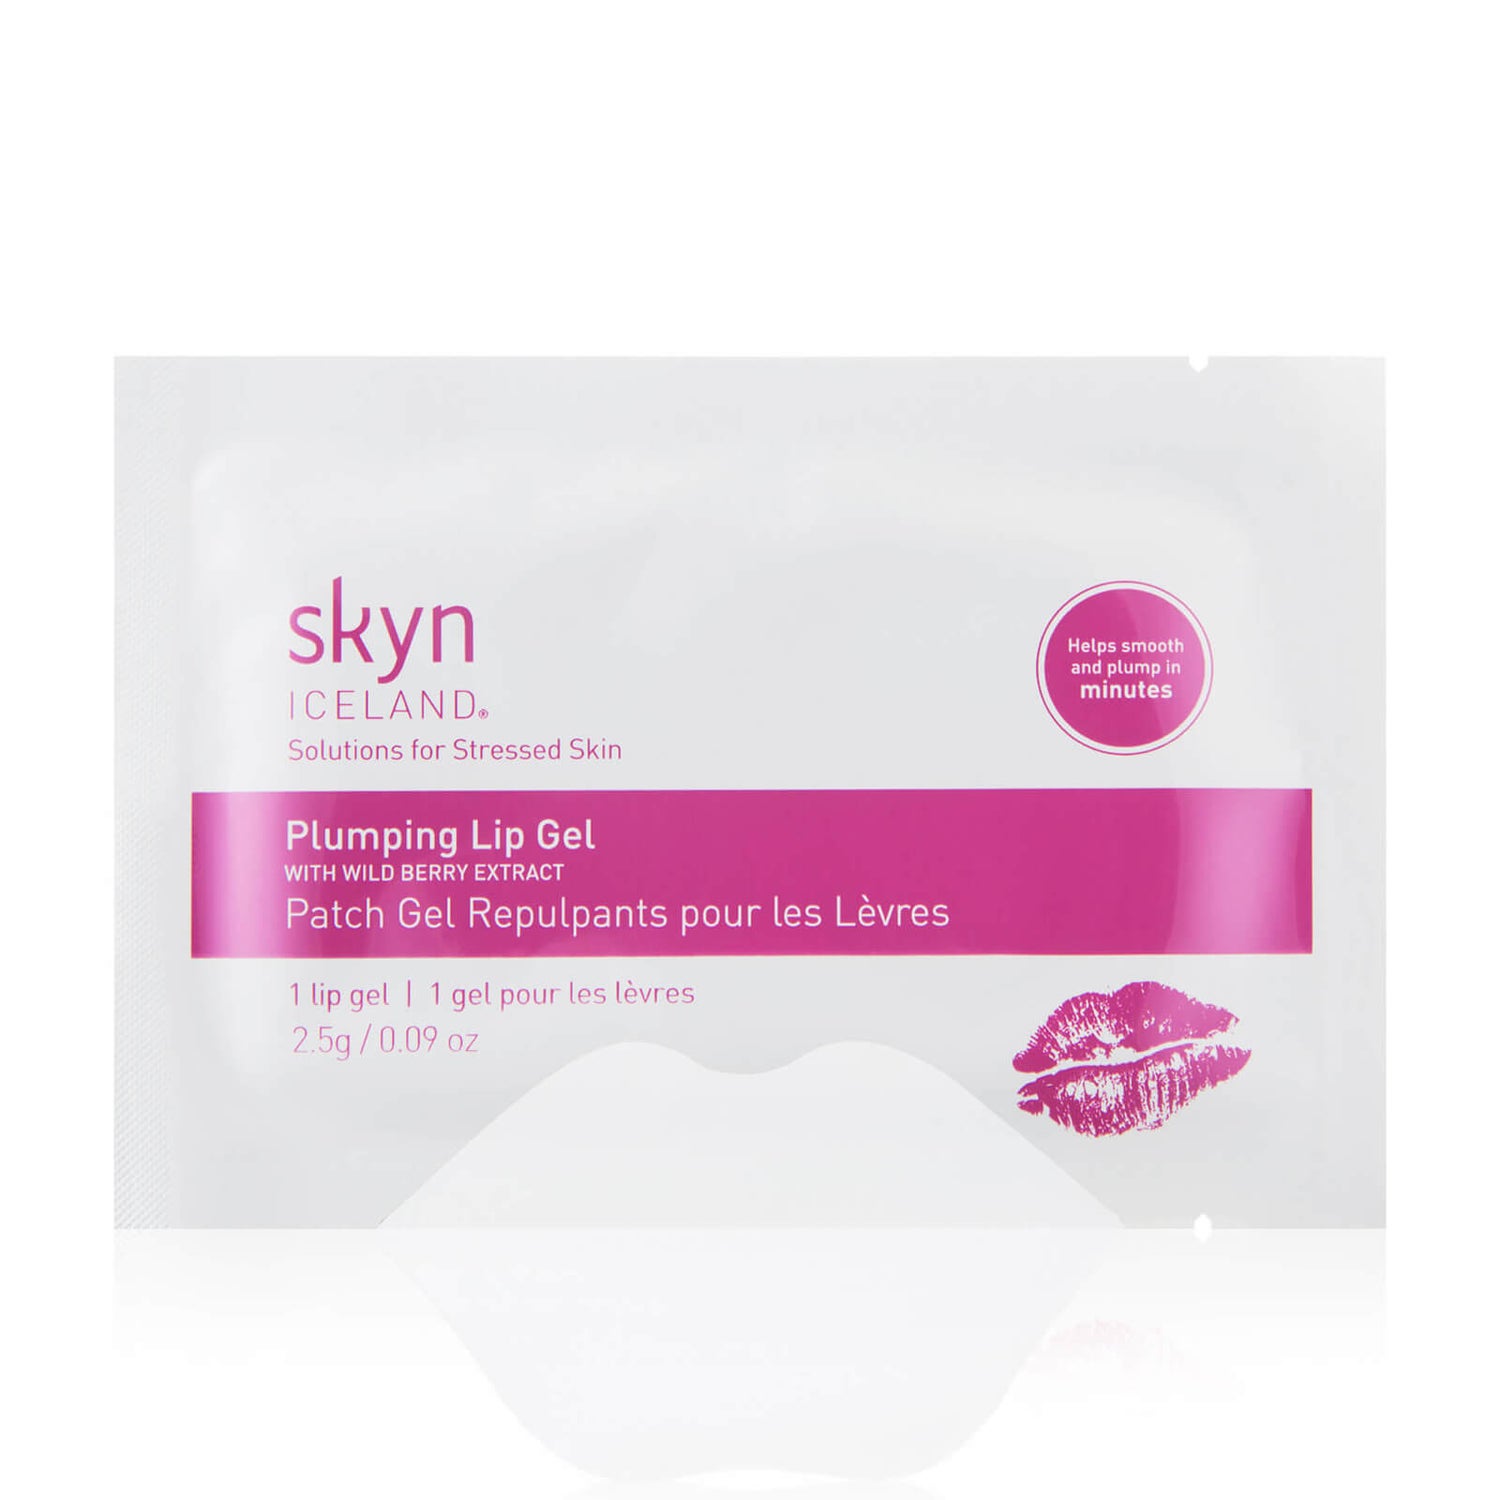 skyn ICELAND Plumping Lip Gels with Wild Berry Extract (2 Pack)